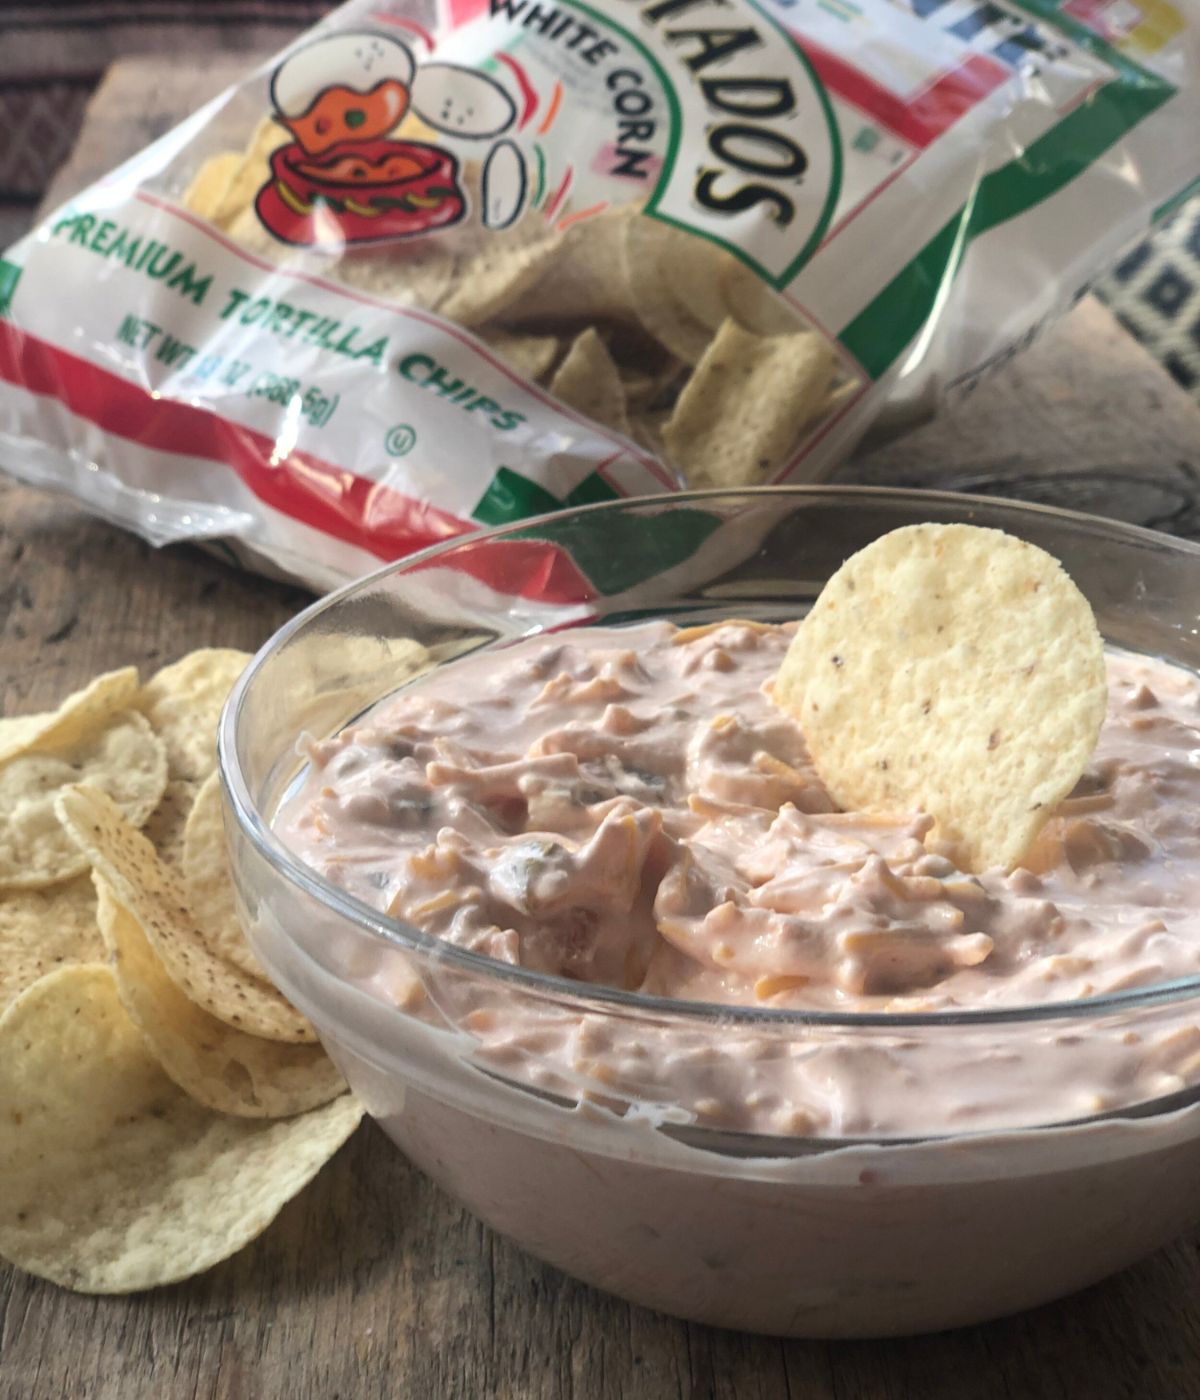 Sue's dip in a glass bowl next to a bag of chips